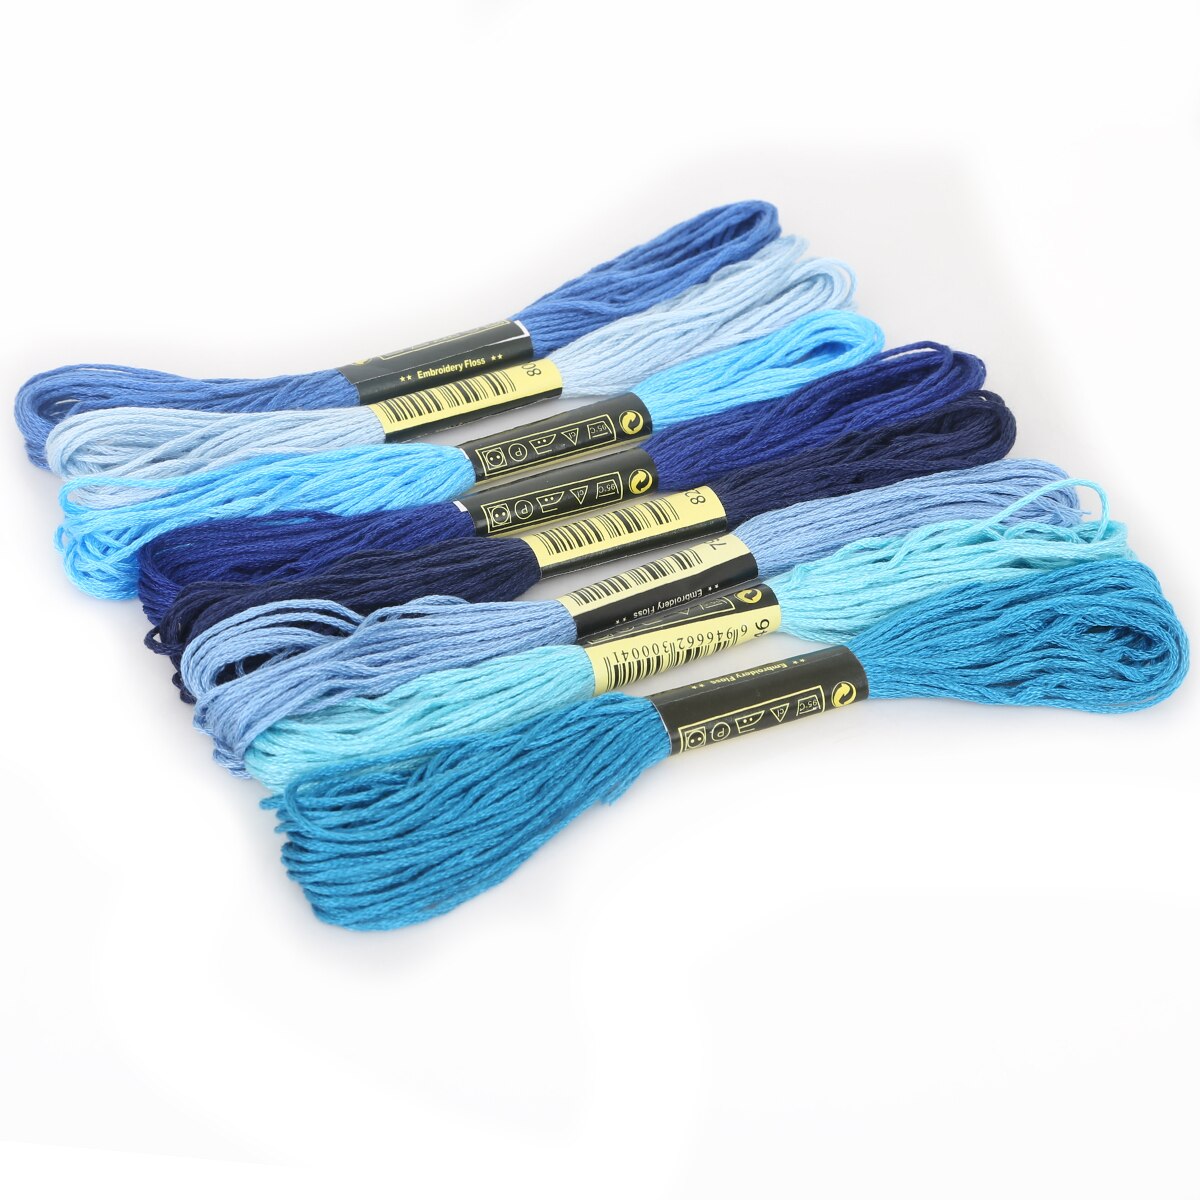 8pcs 7.5m Multiple Color Thread Cross Stitch Cotton Sewing Skeins Craft Embroidery Thread Floss Kit DIY Sewing Tools Accessories: Blue